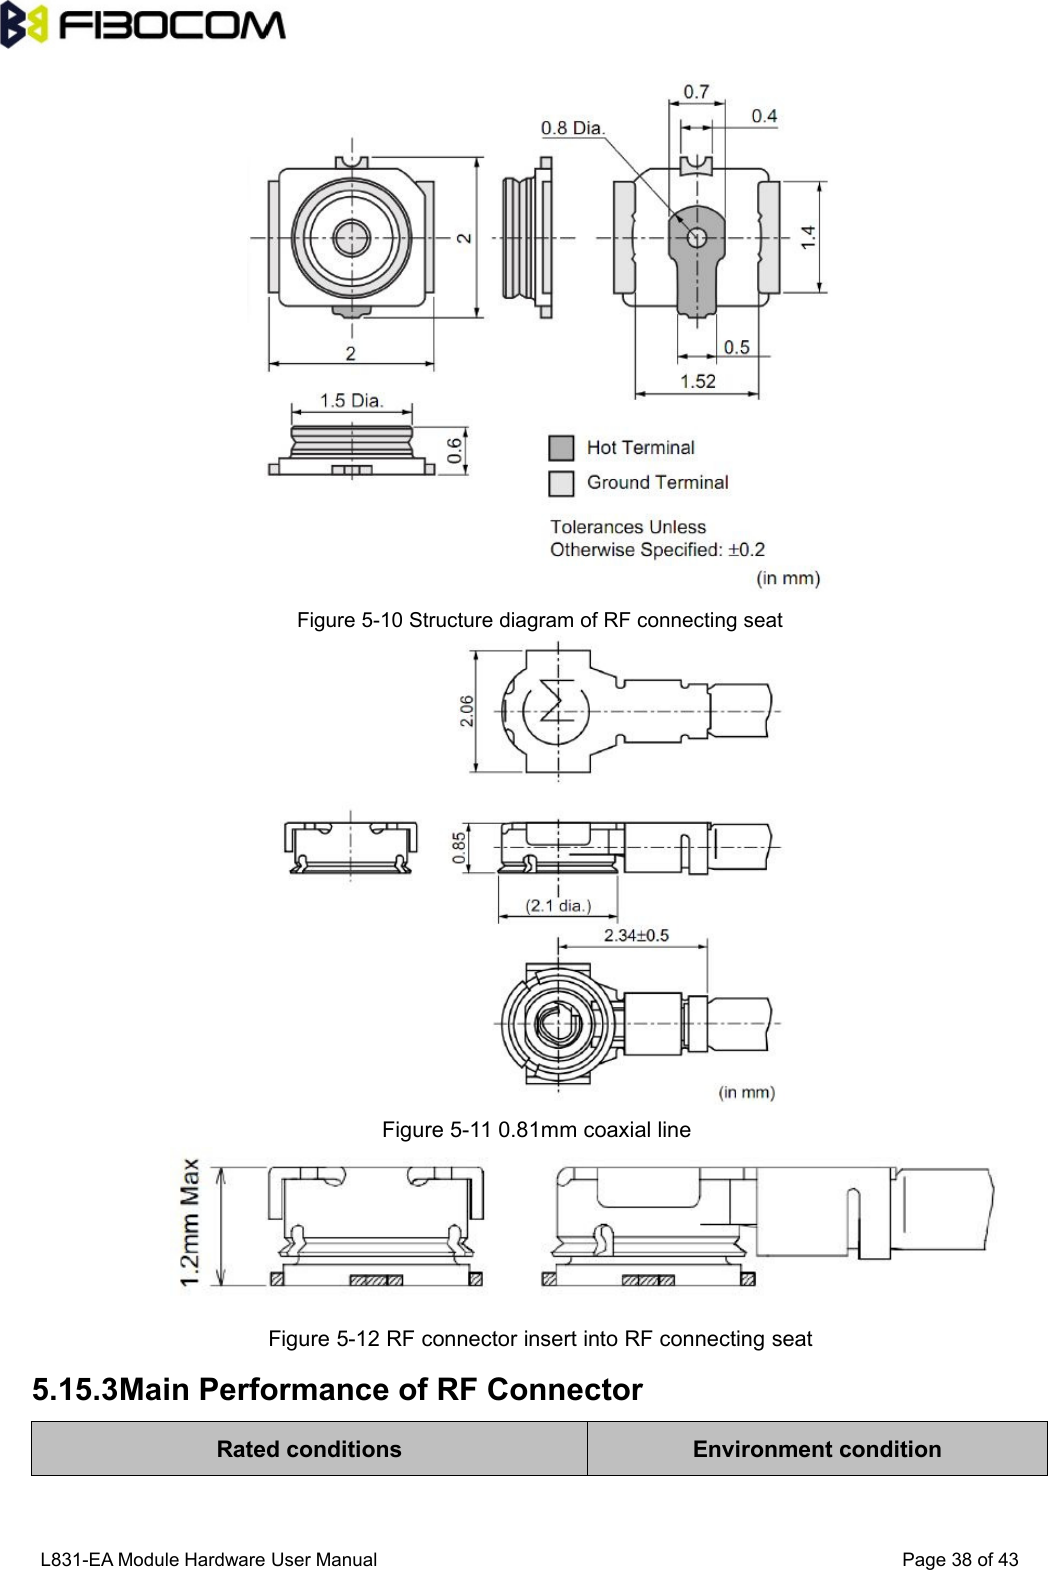 L831-EA Module Hardware User Manual Page38of43Figure 5-10 Structure diagram of RF connecting seatFigure 5-11 0.81mm coaxial lineFigure 5-12 RF connector insert into RF connecting seat5.15.3Main Performance of RF ConnectorRated conditionsEnvironment condition